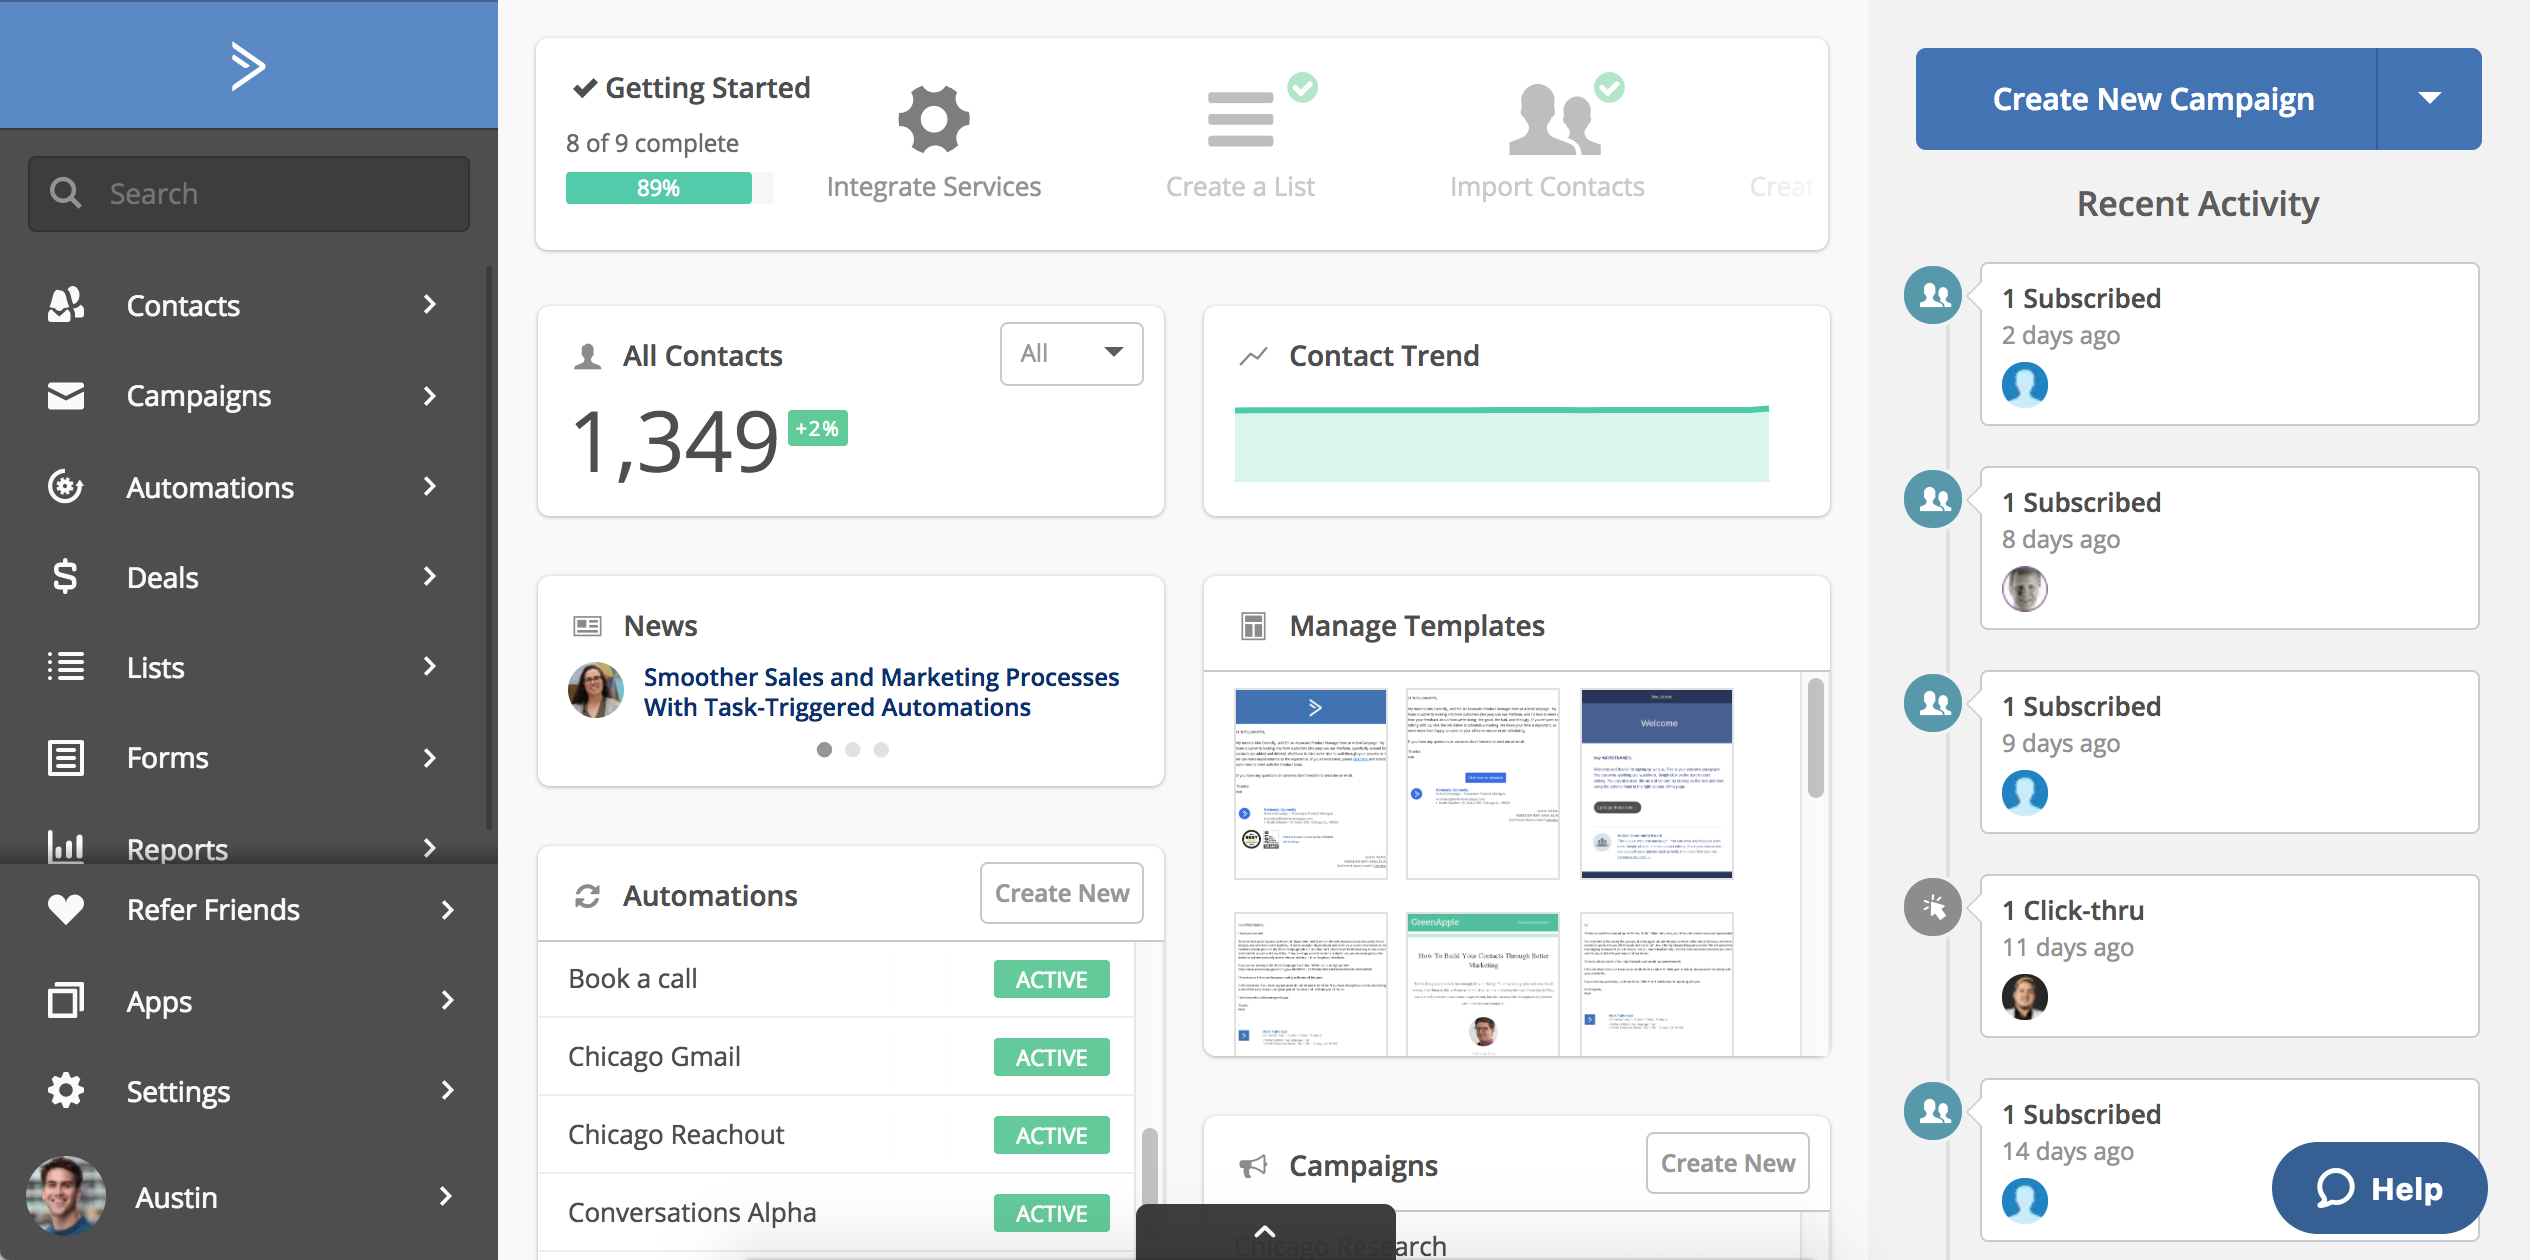 20 Research-Backed Marketing Automation Stats You Should Know in 2020